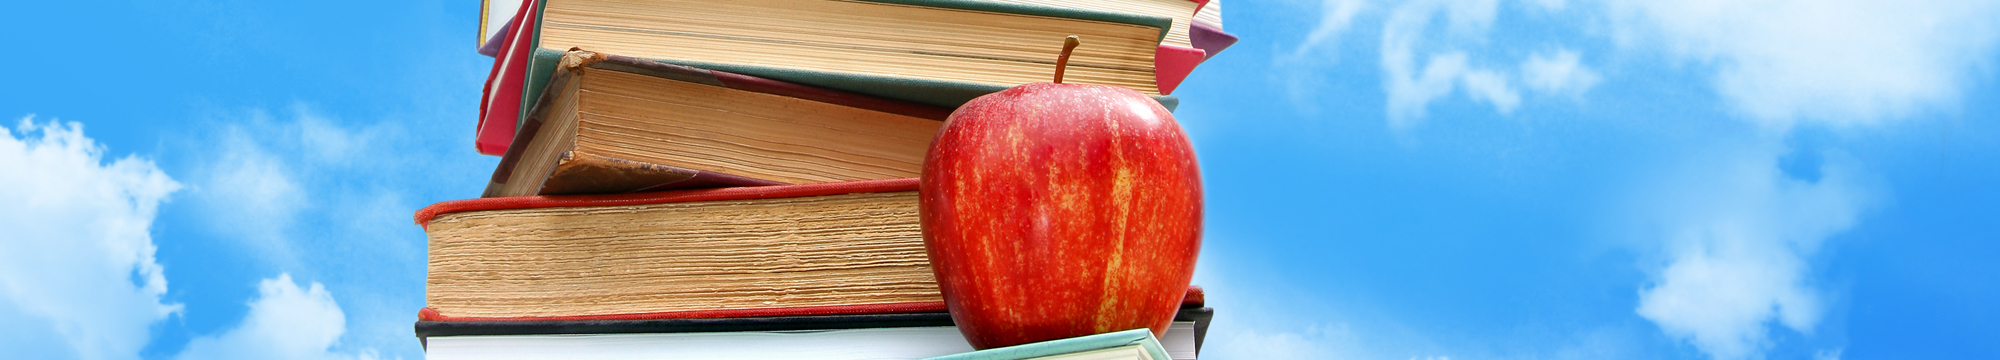 a red apple on a stack of books with a blue sky in the background